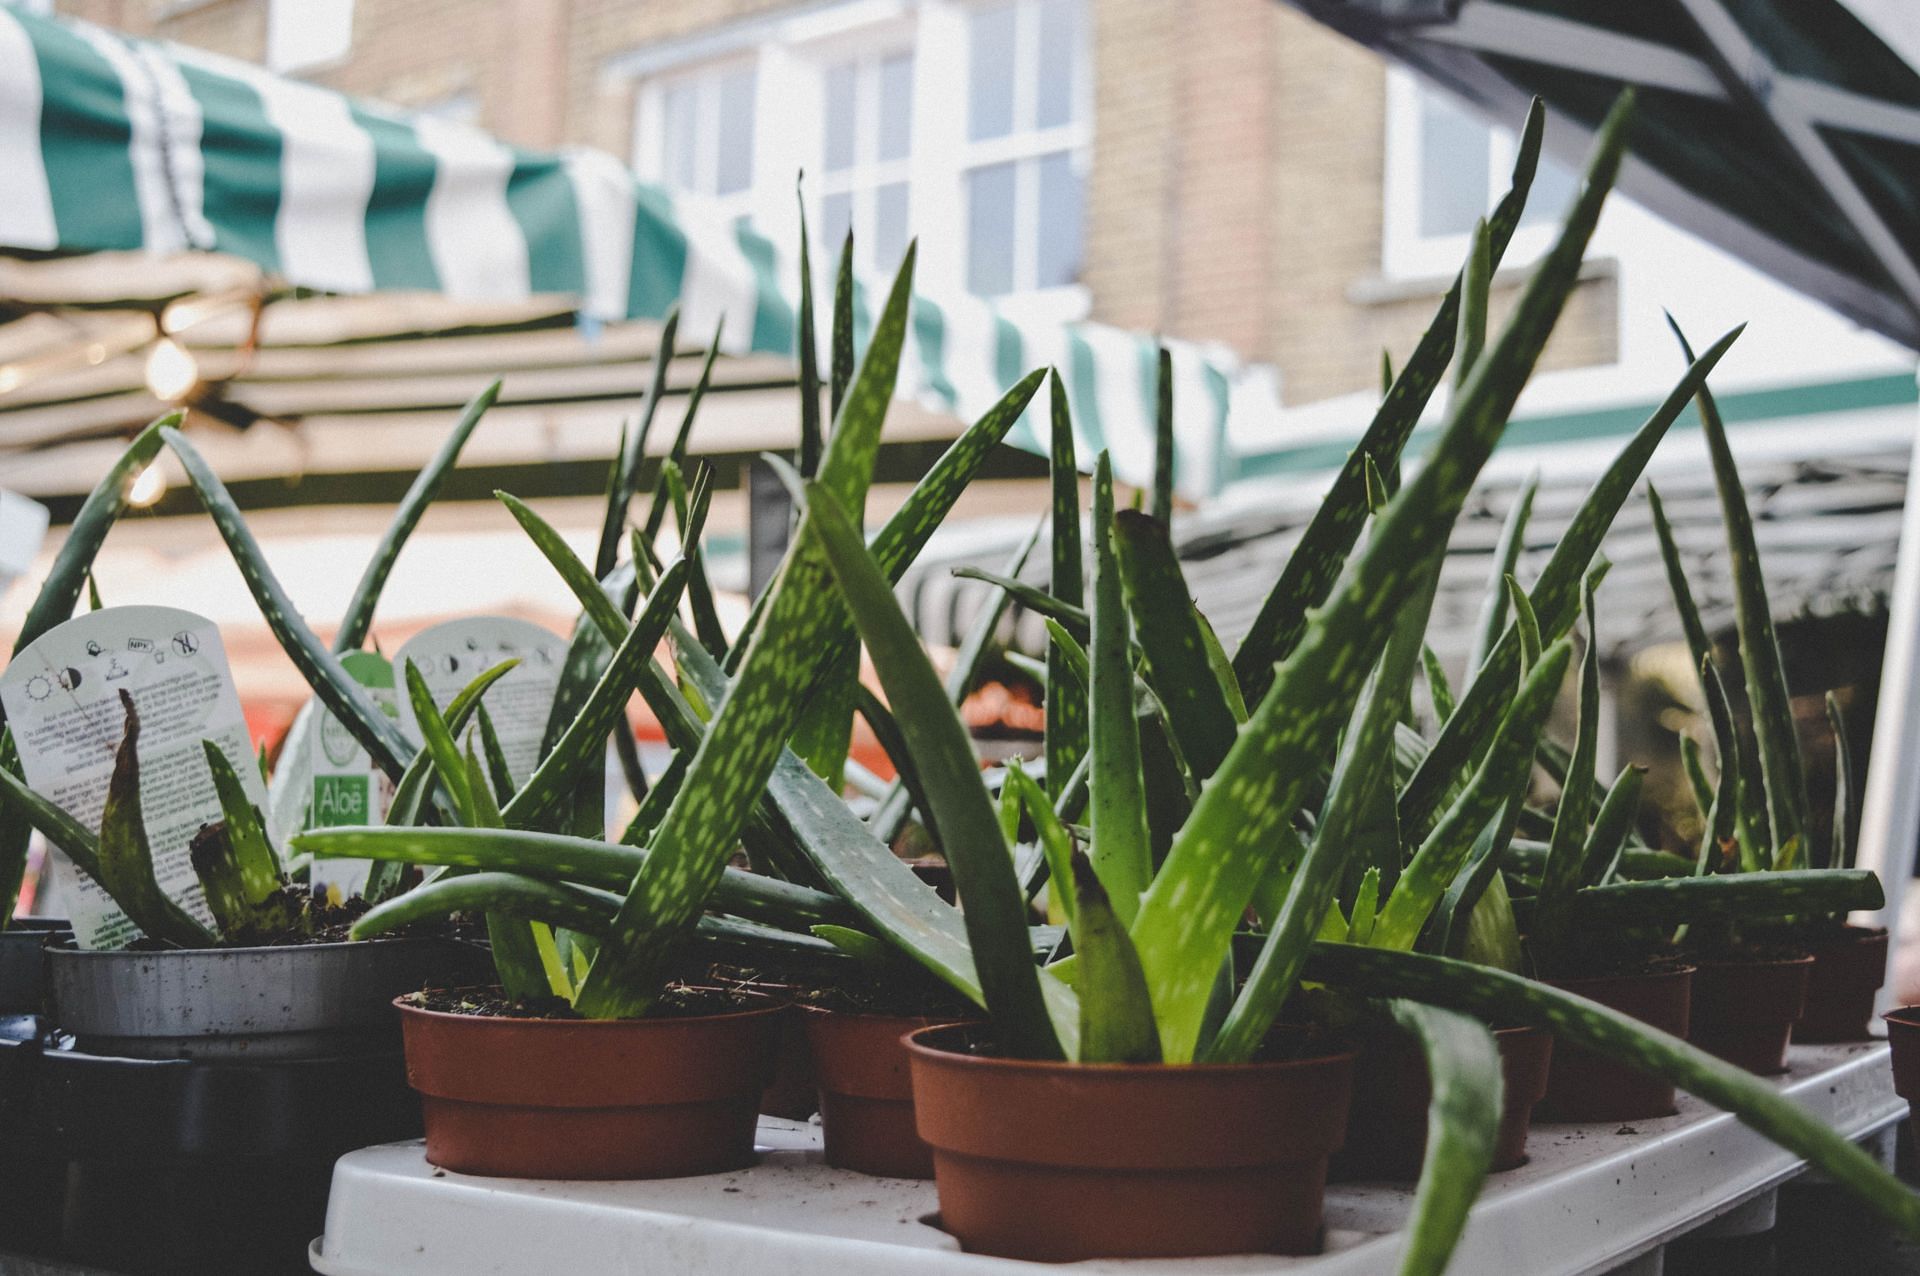 Aloe vera is a succulent plant that has been used for medicinal purposes for centuries (Image via Pexels)